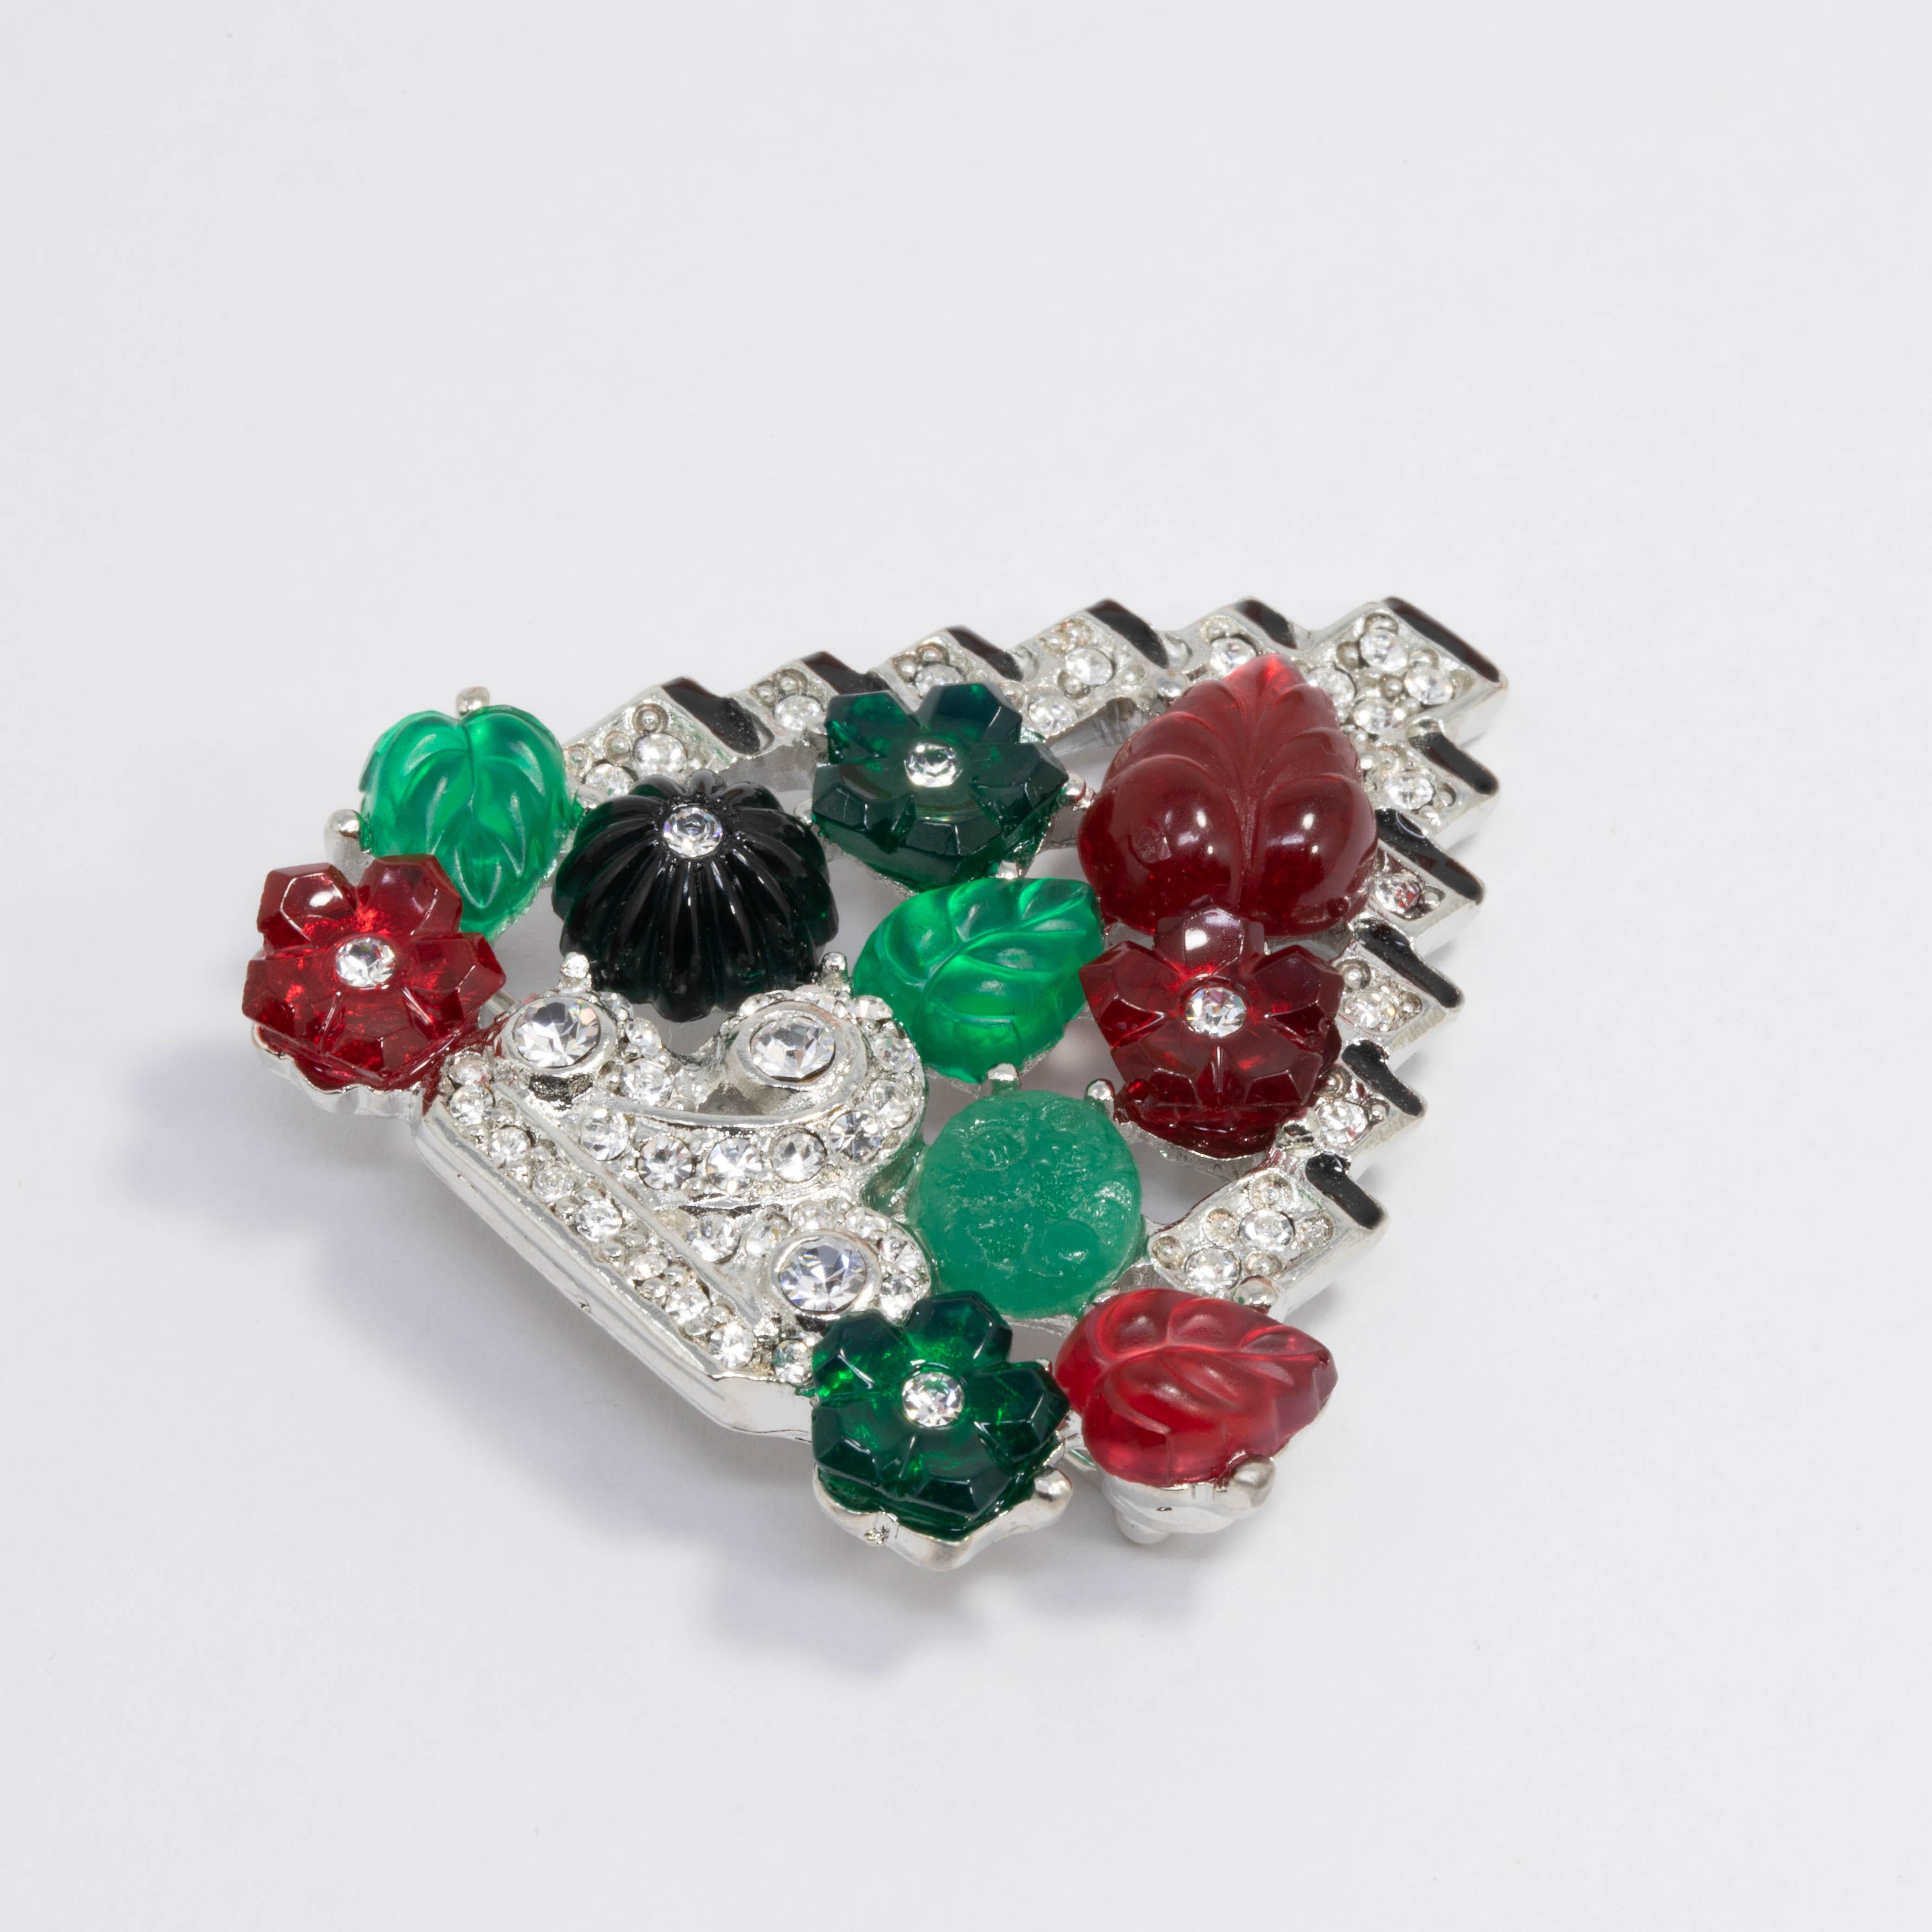 Colorful tutti-frutti style art deco brooch by Kenneth Lane. Features bright green and red flower and leaf motifs accented with clear crystals and black enamel. Rhodium-plated metal setting.

Pair with the Kenneth Jay Lane Tutti Frutti art deco